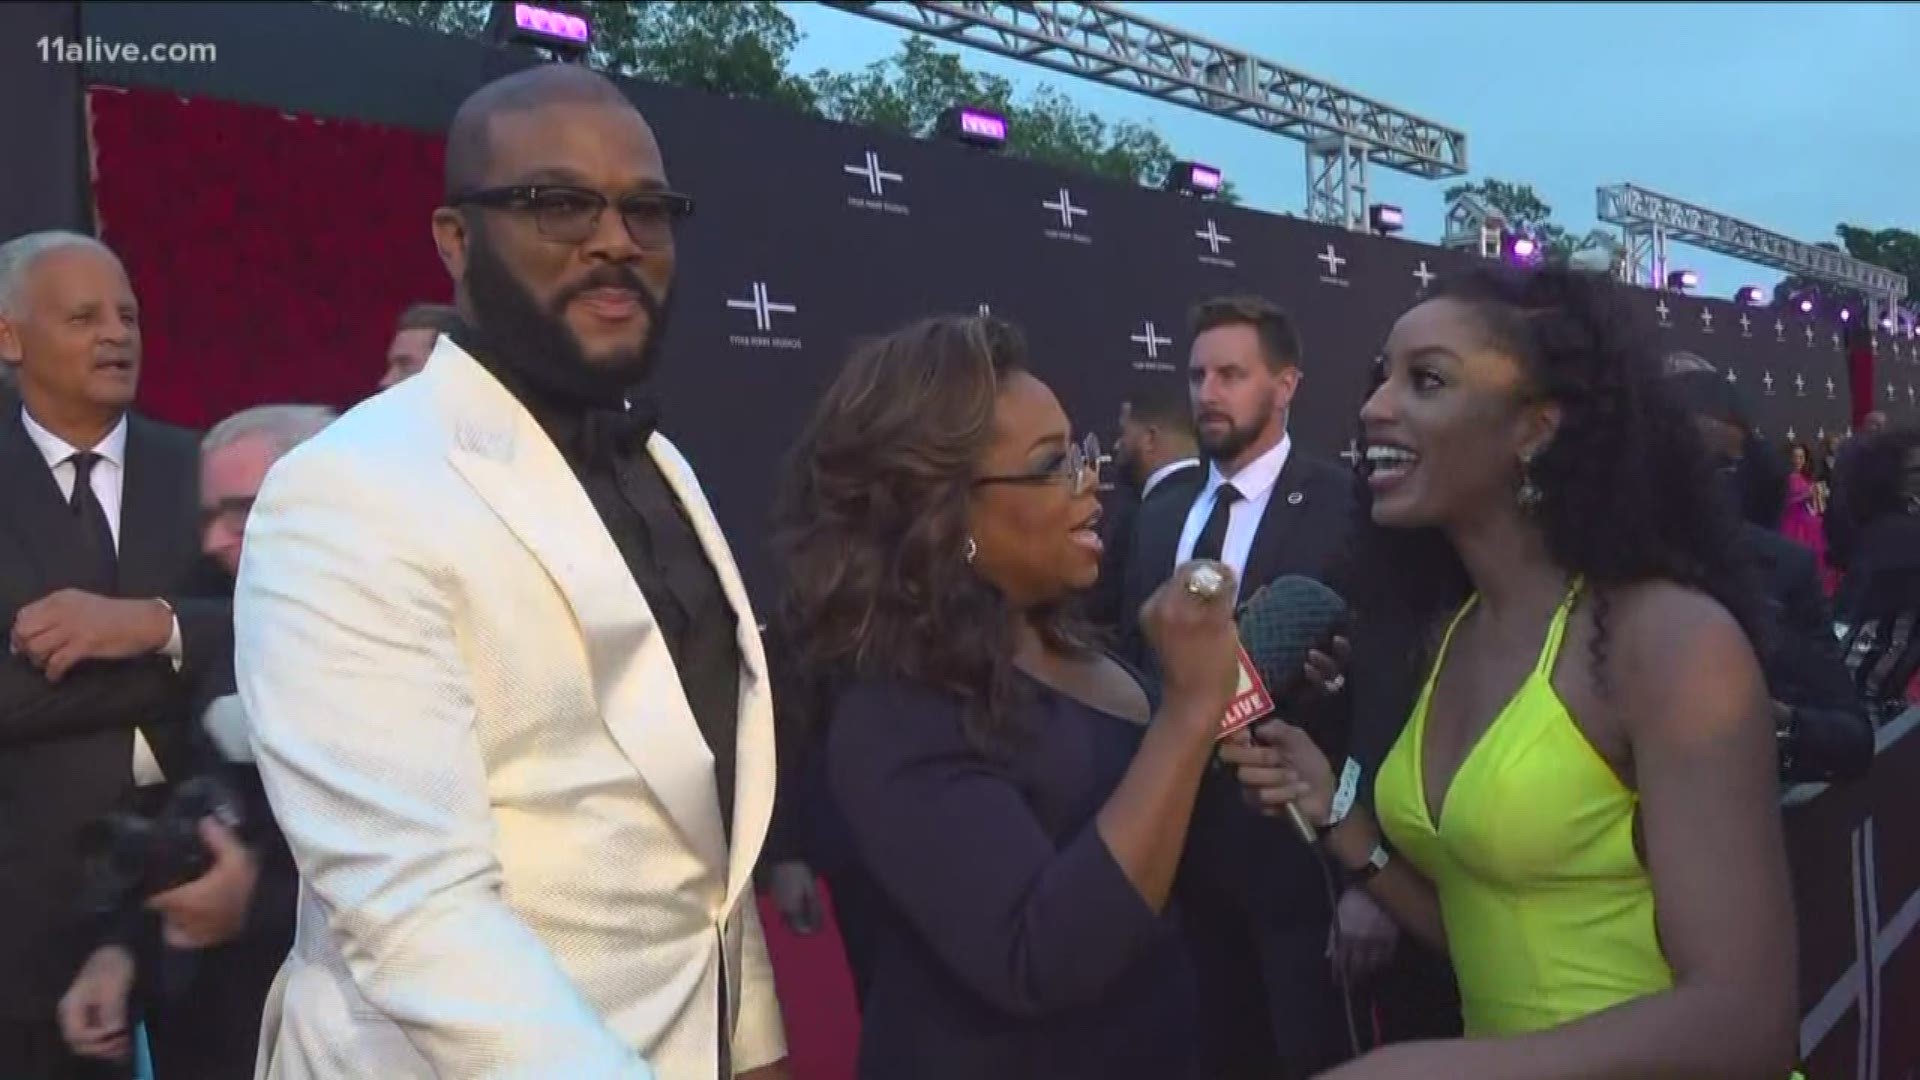 Some of America's biggest stars turned out for Tyler Perry's grand opening of a mega-sized production studio.